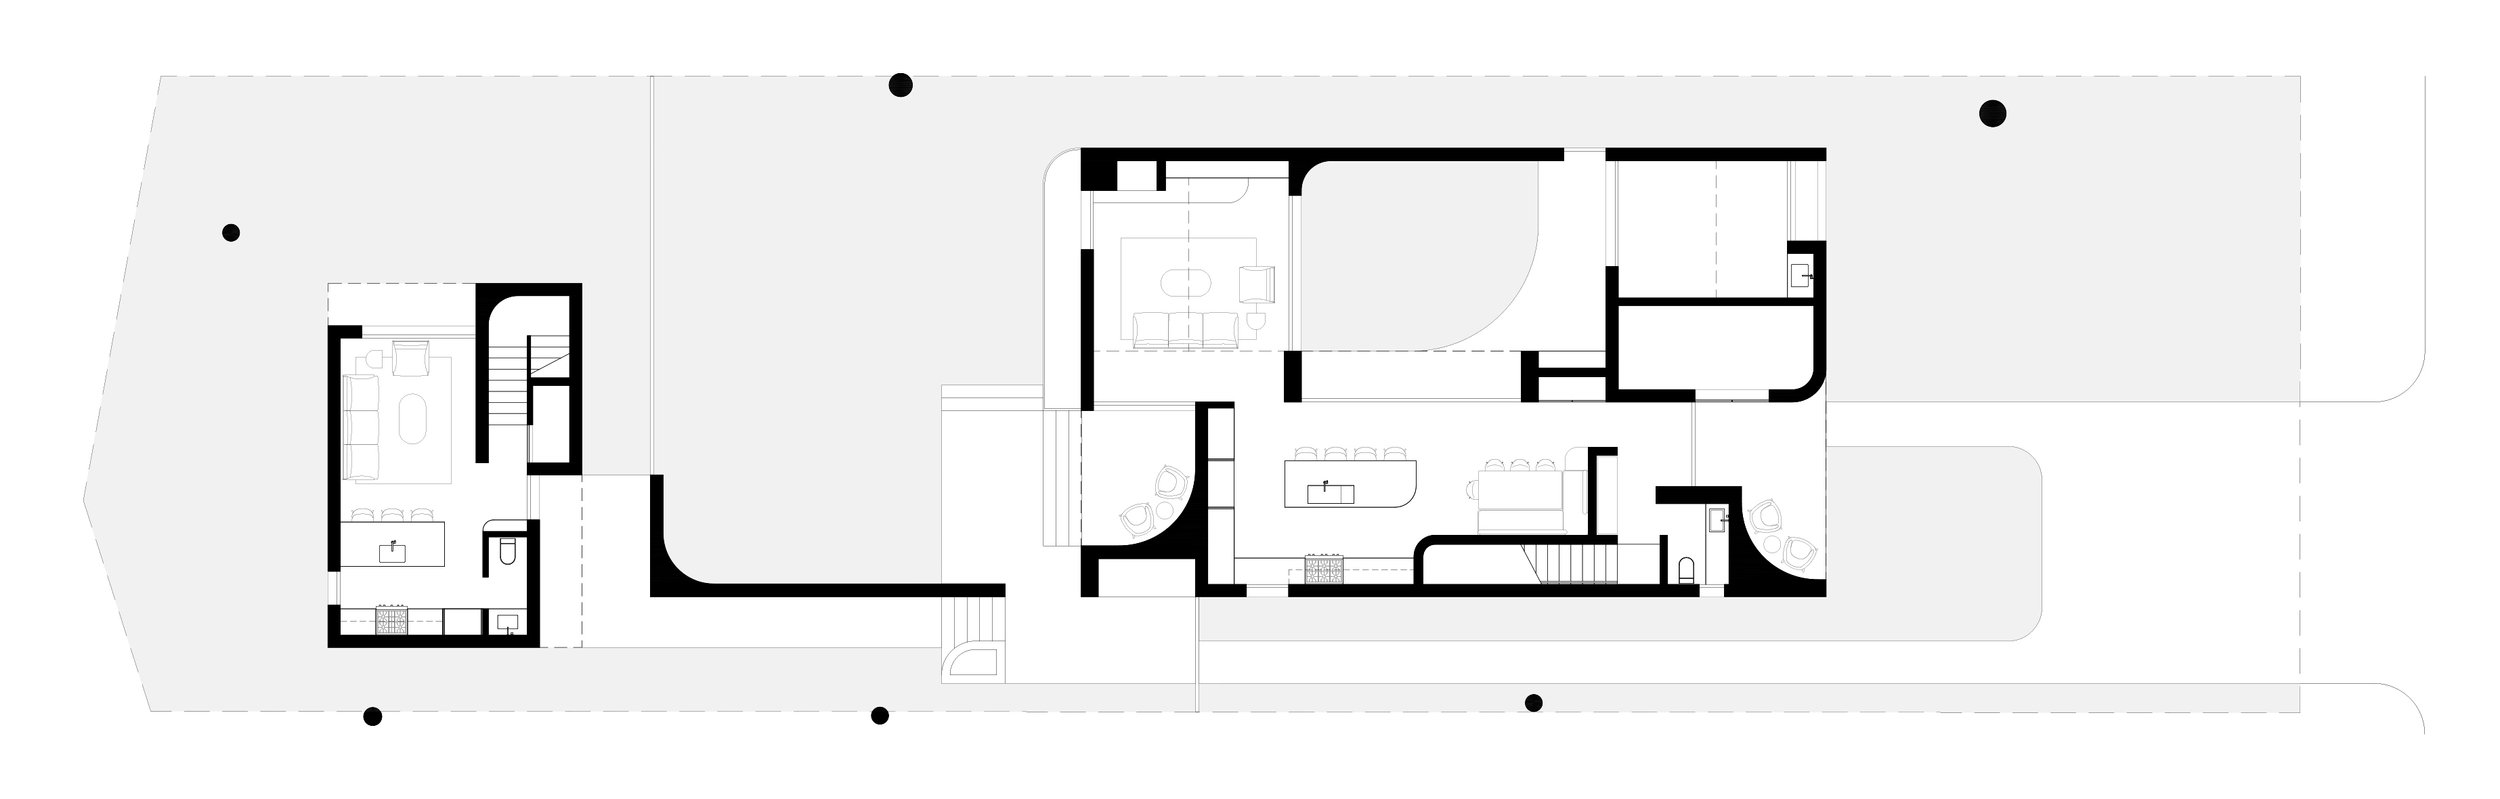 230629_House Courtyard House - Graphic Plans_0004.jpg